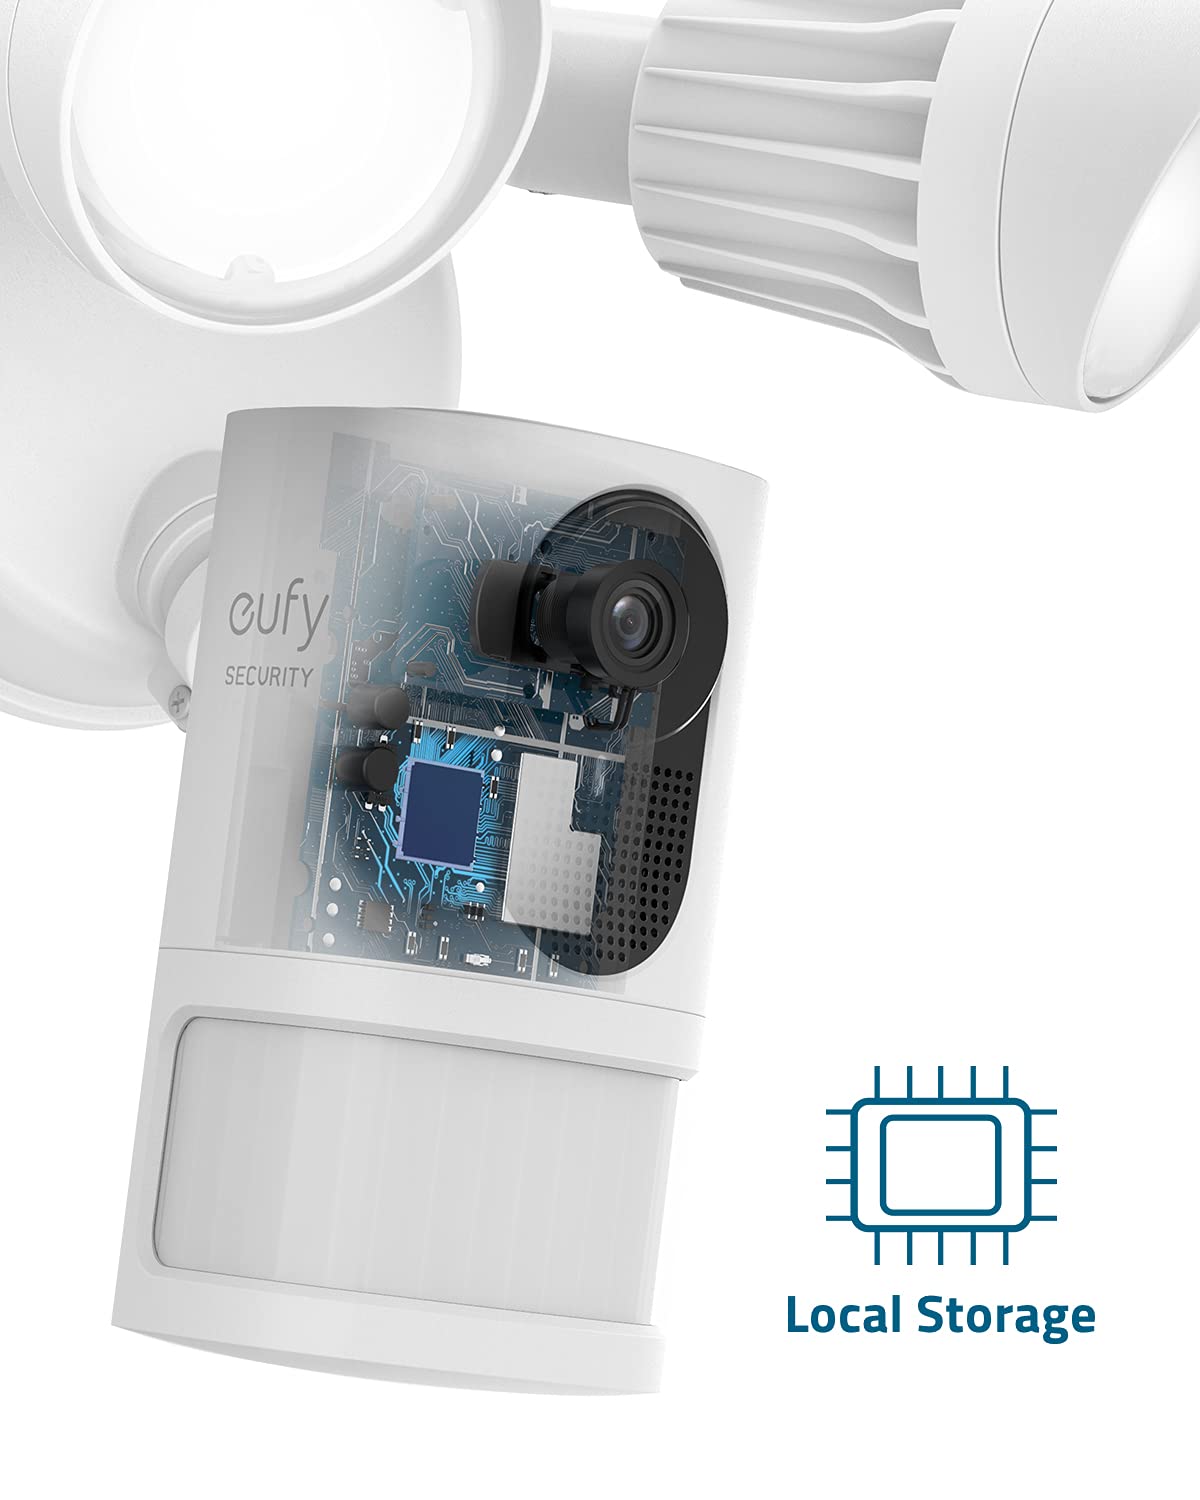 eufy security Floodlight Camera E with Built-in AI, 2K Resolution, 2-Way Audio, No Monthly Fees, 2000-Lumen Brightness, Weatherproof, Existing Outdoor Wiring and Weatherproof Junction Box Required